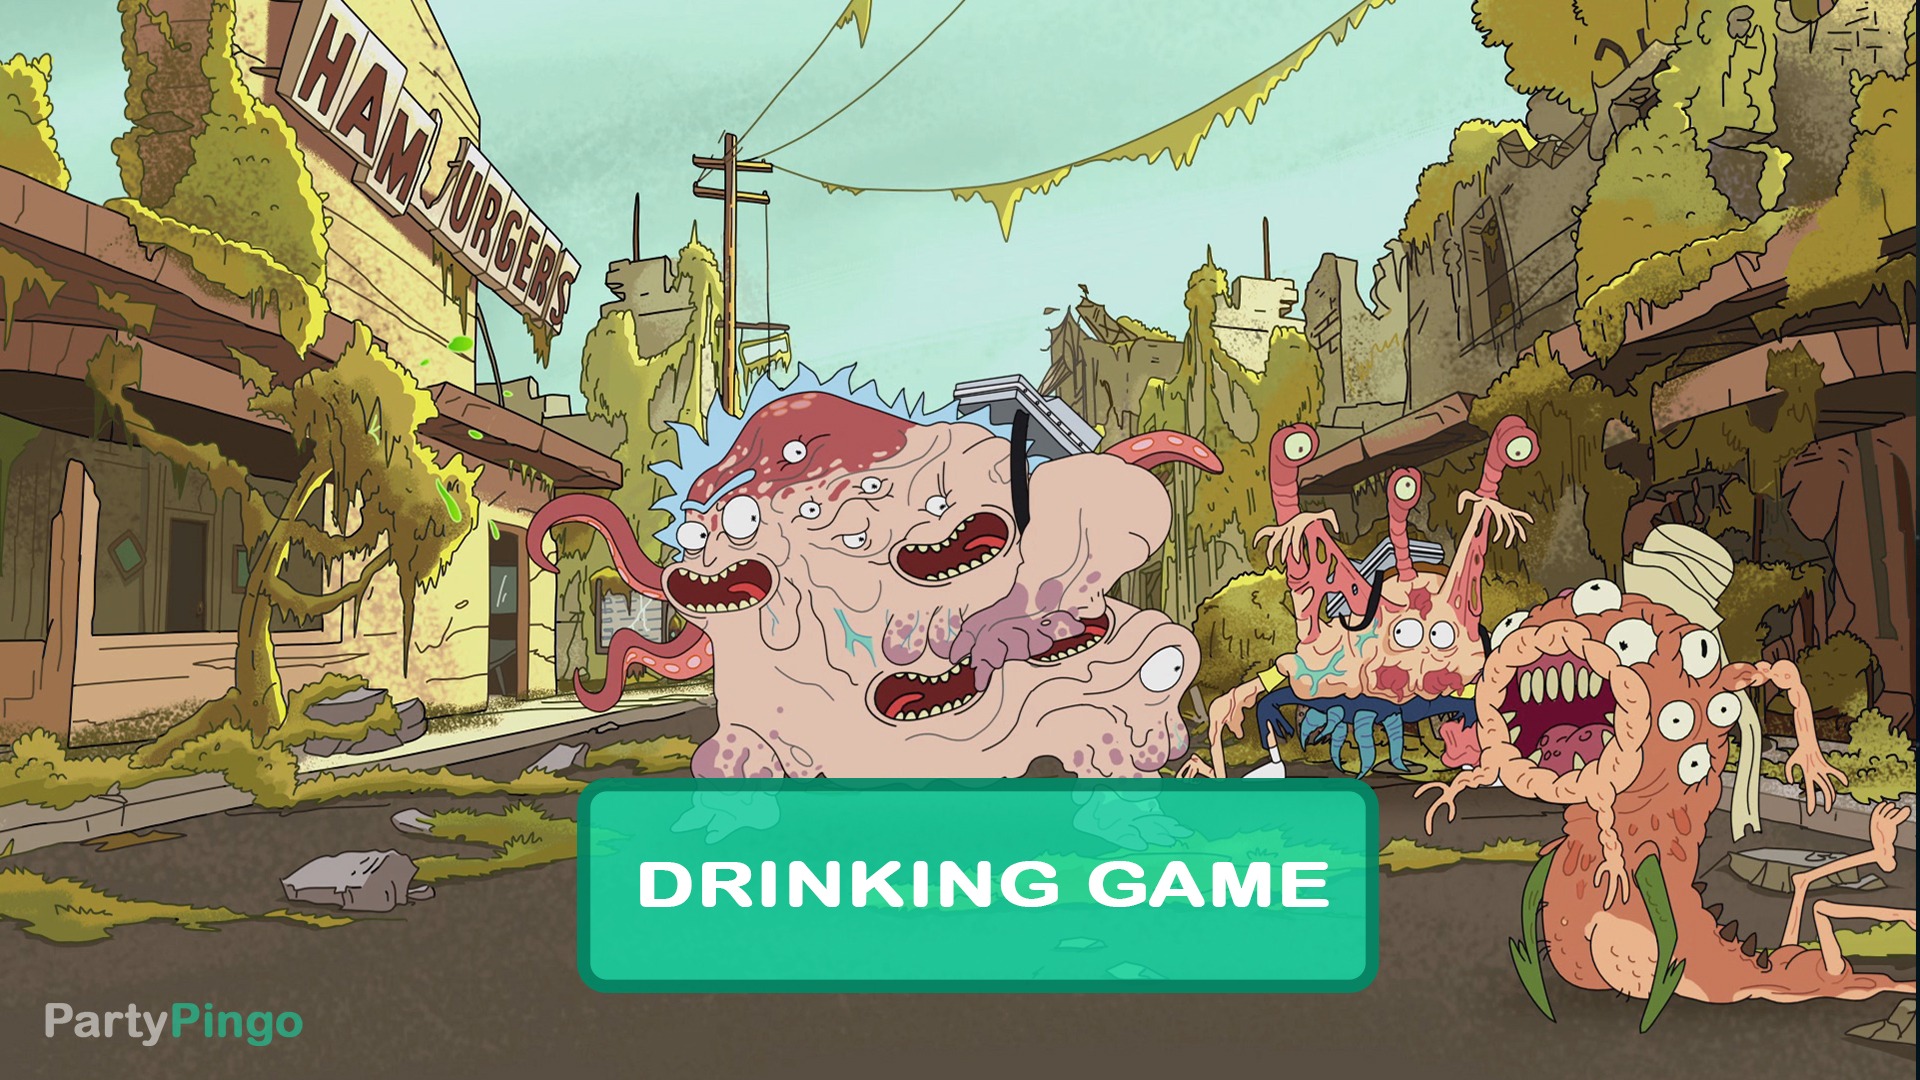 Rick and Morty - Rick Potion 9 Drinking Game